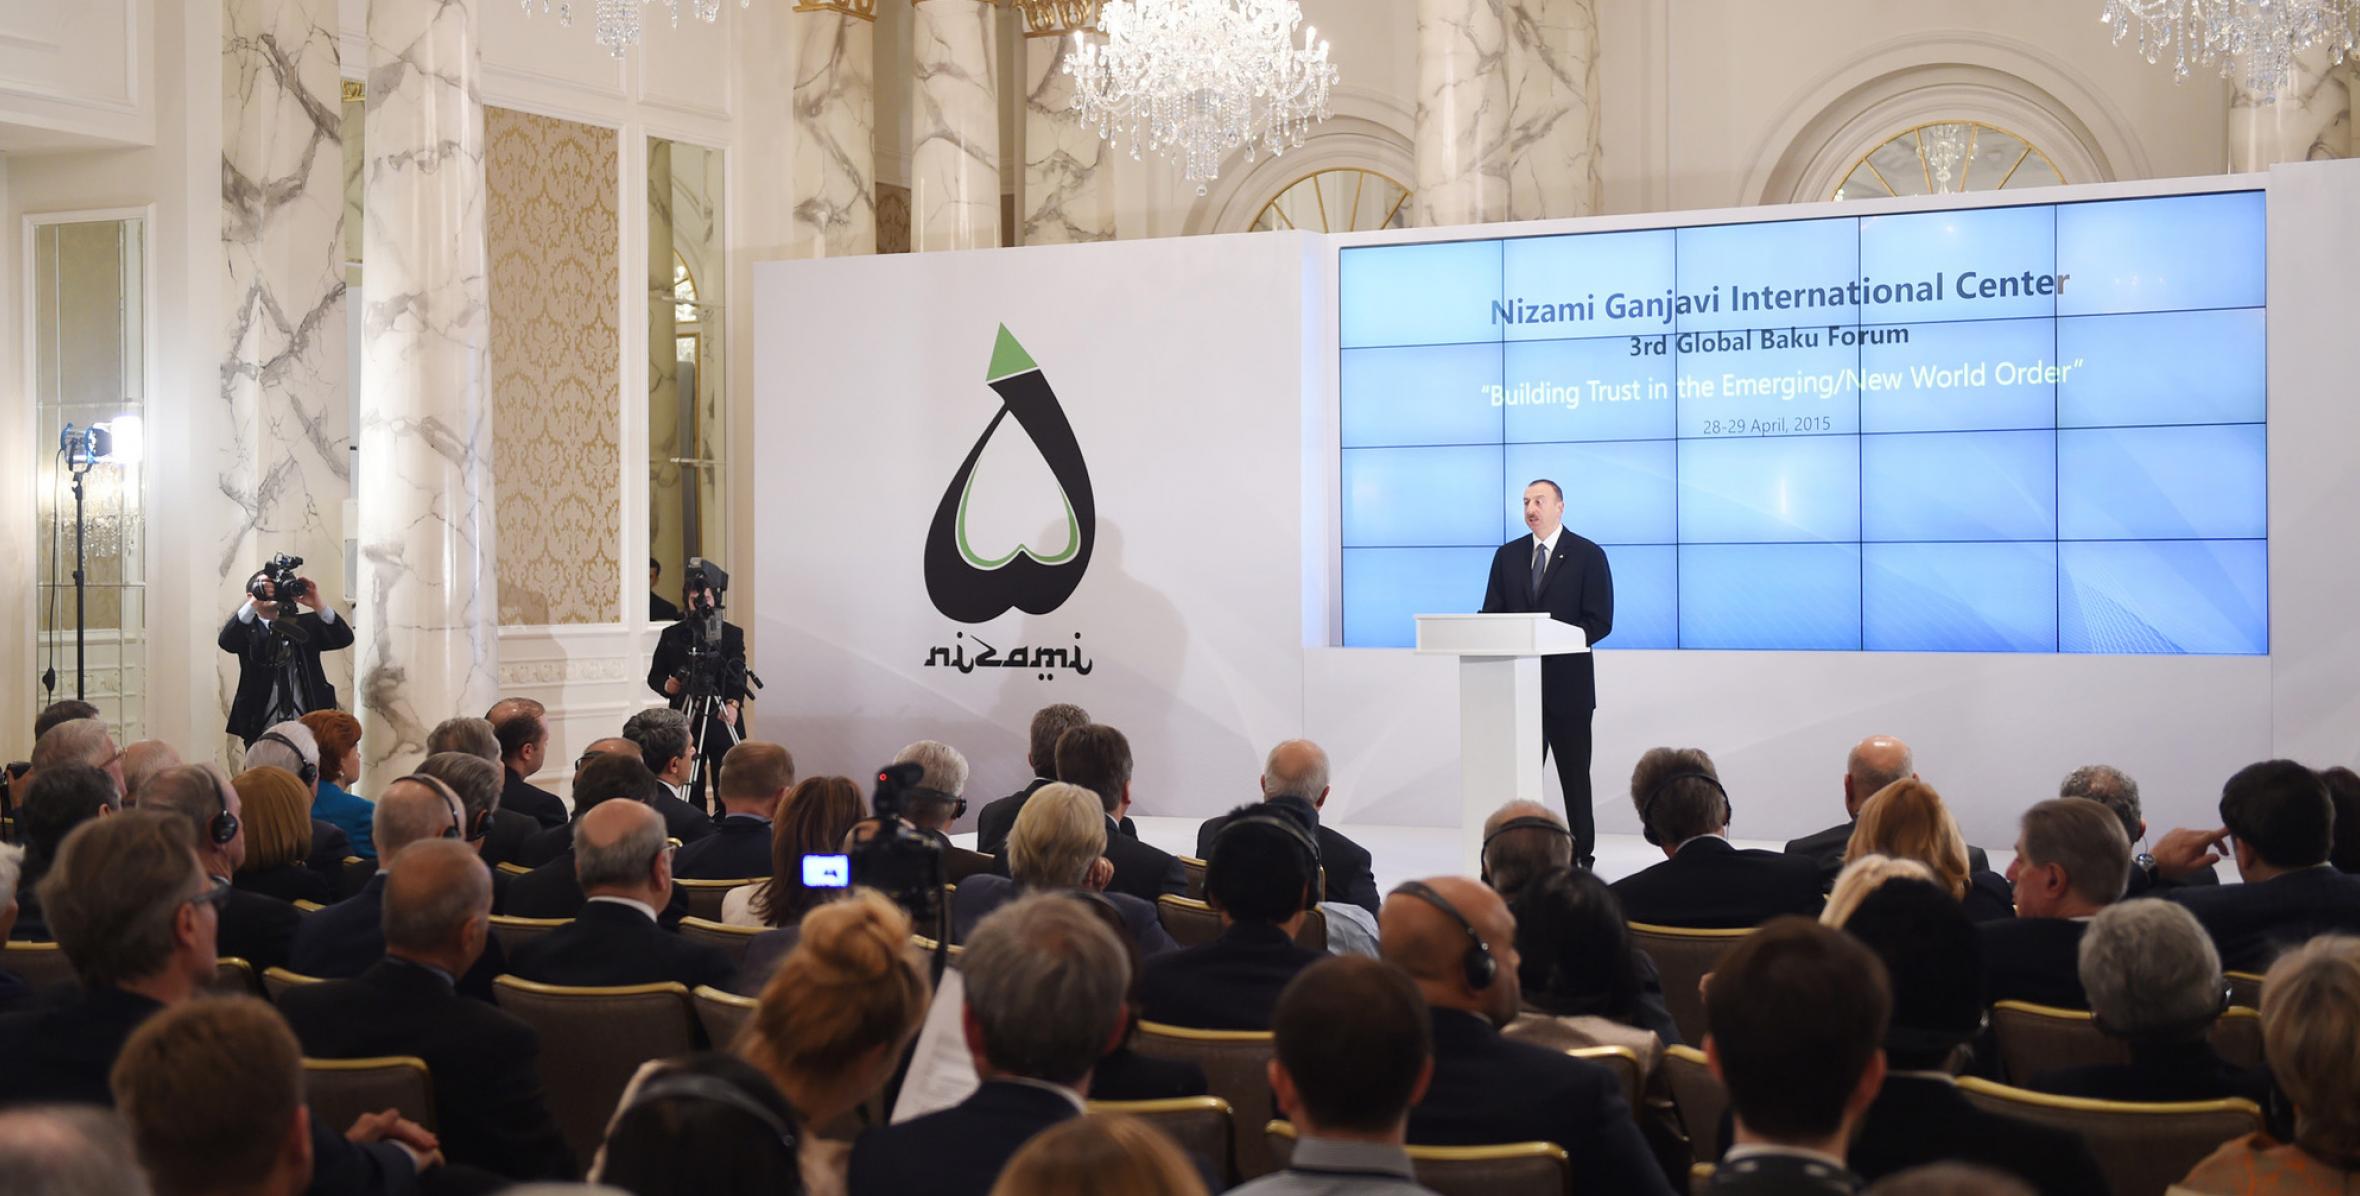 Speech by Ilham Aliyev at the opening ceremony of the 3rd Global Baku Forum